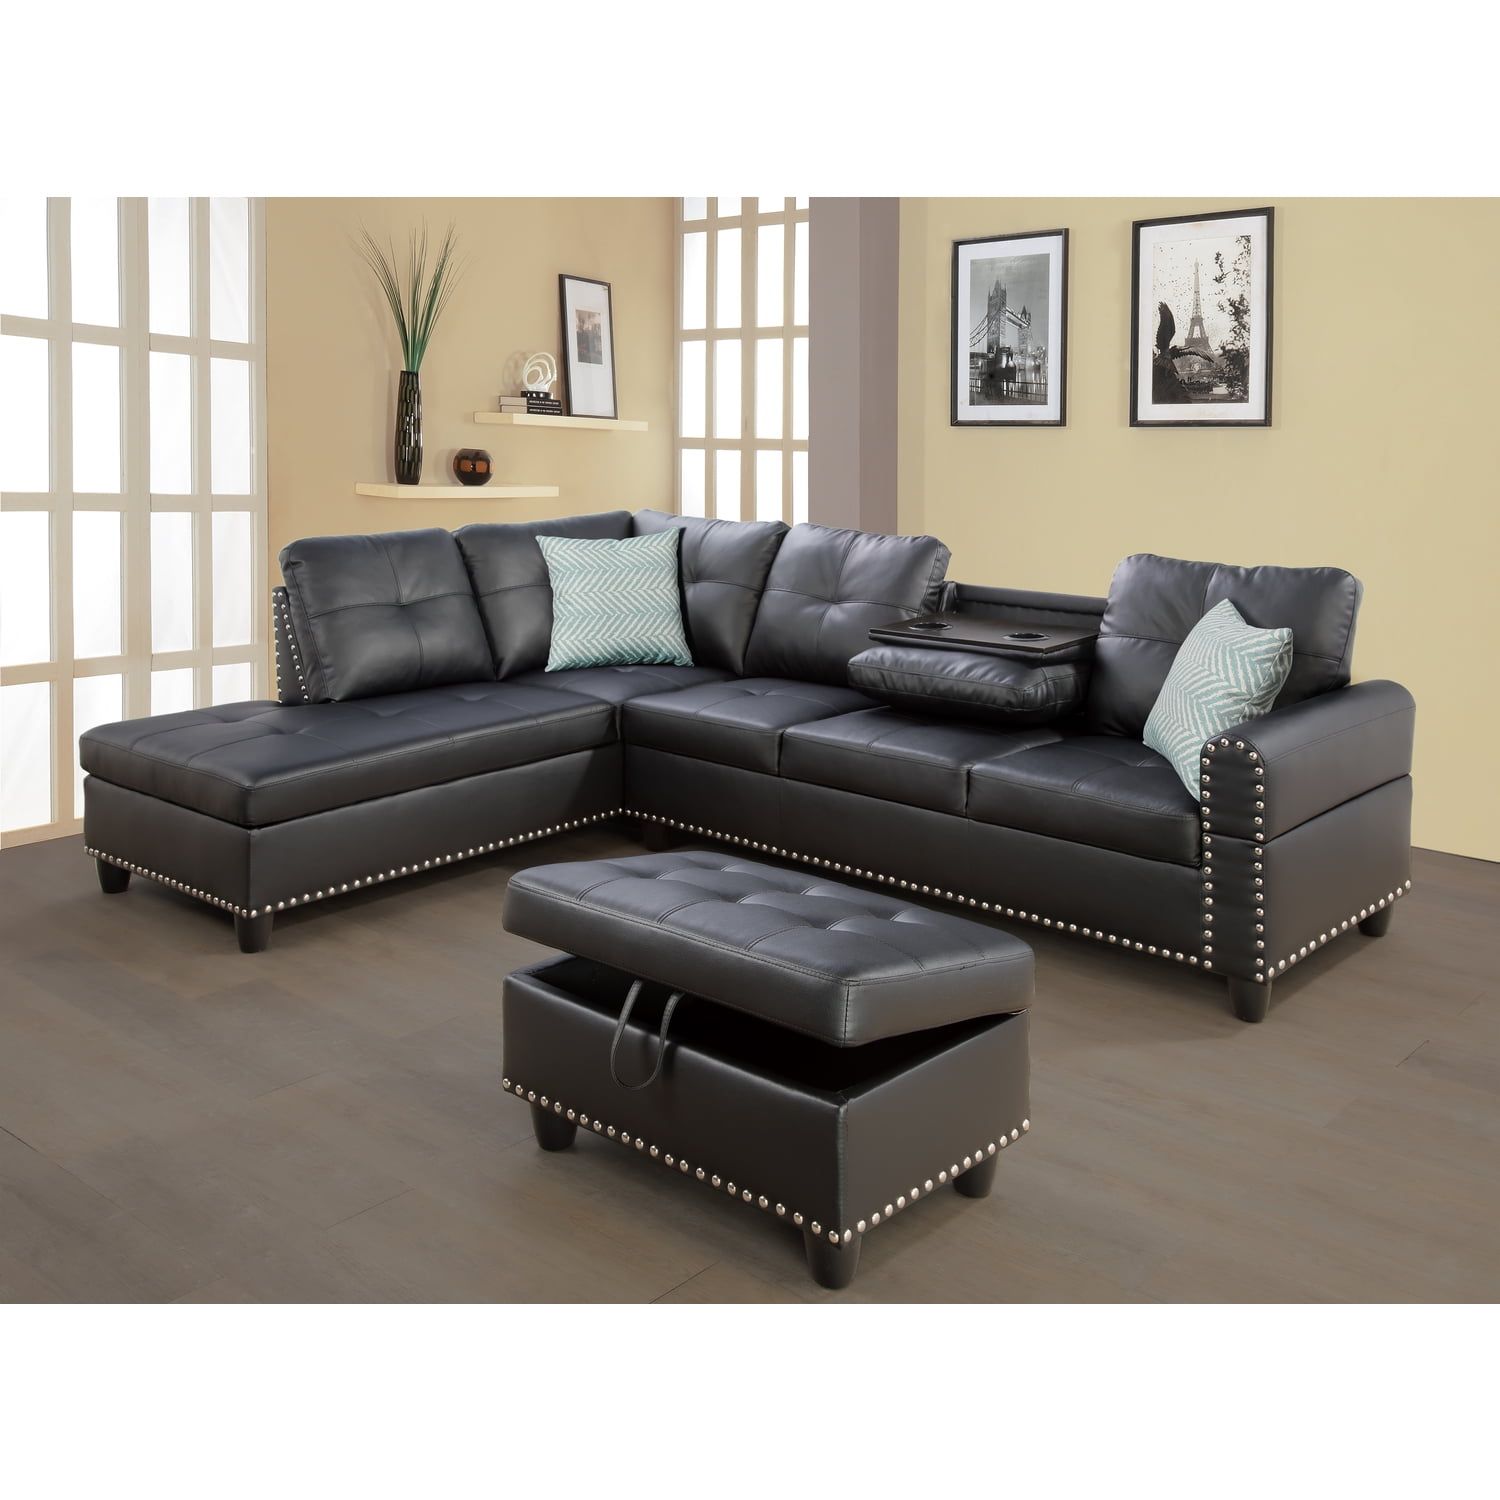 Devion Furniture Faux Leather Sectional Sofa With Ottoman Black –  Walmart Intended For Faux Leather Sectional Sofa Sets (View 5 of 15)